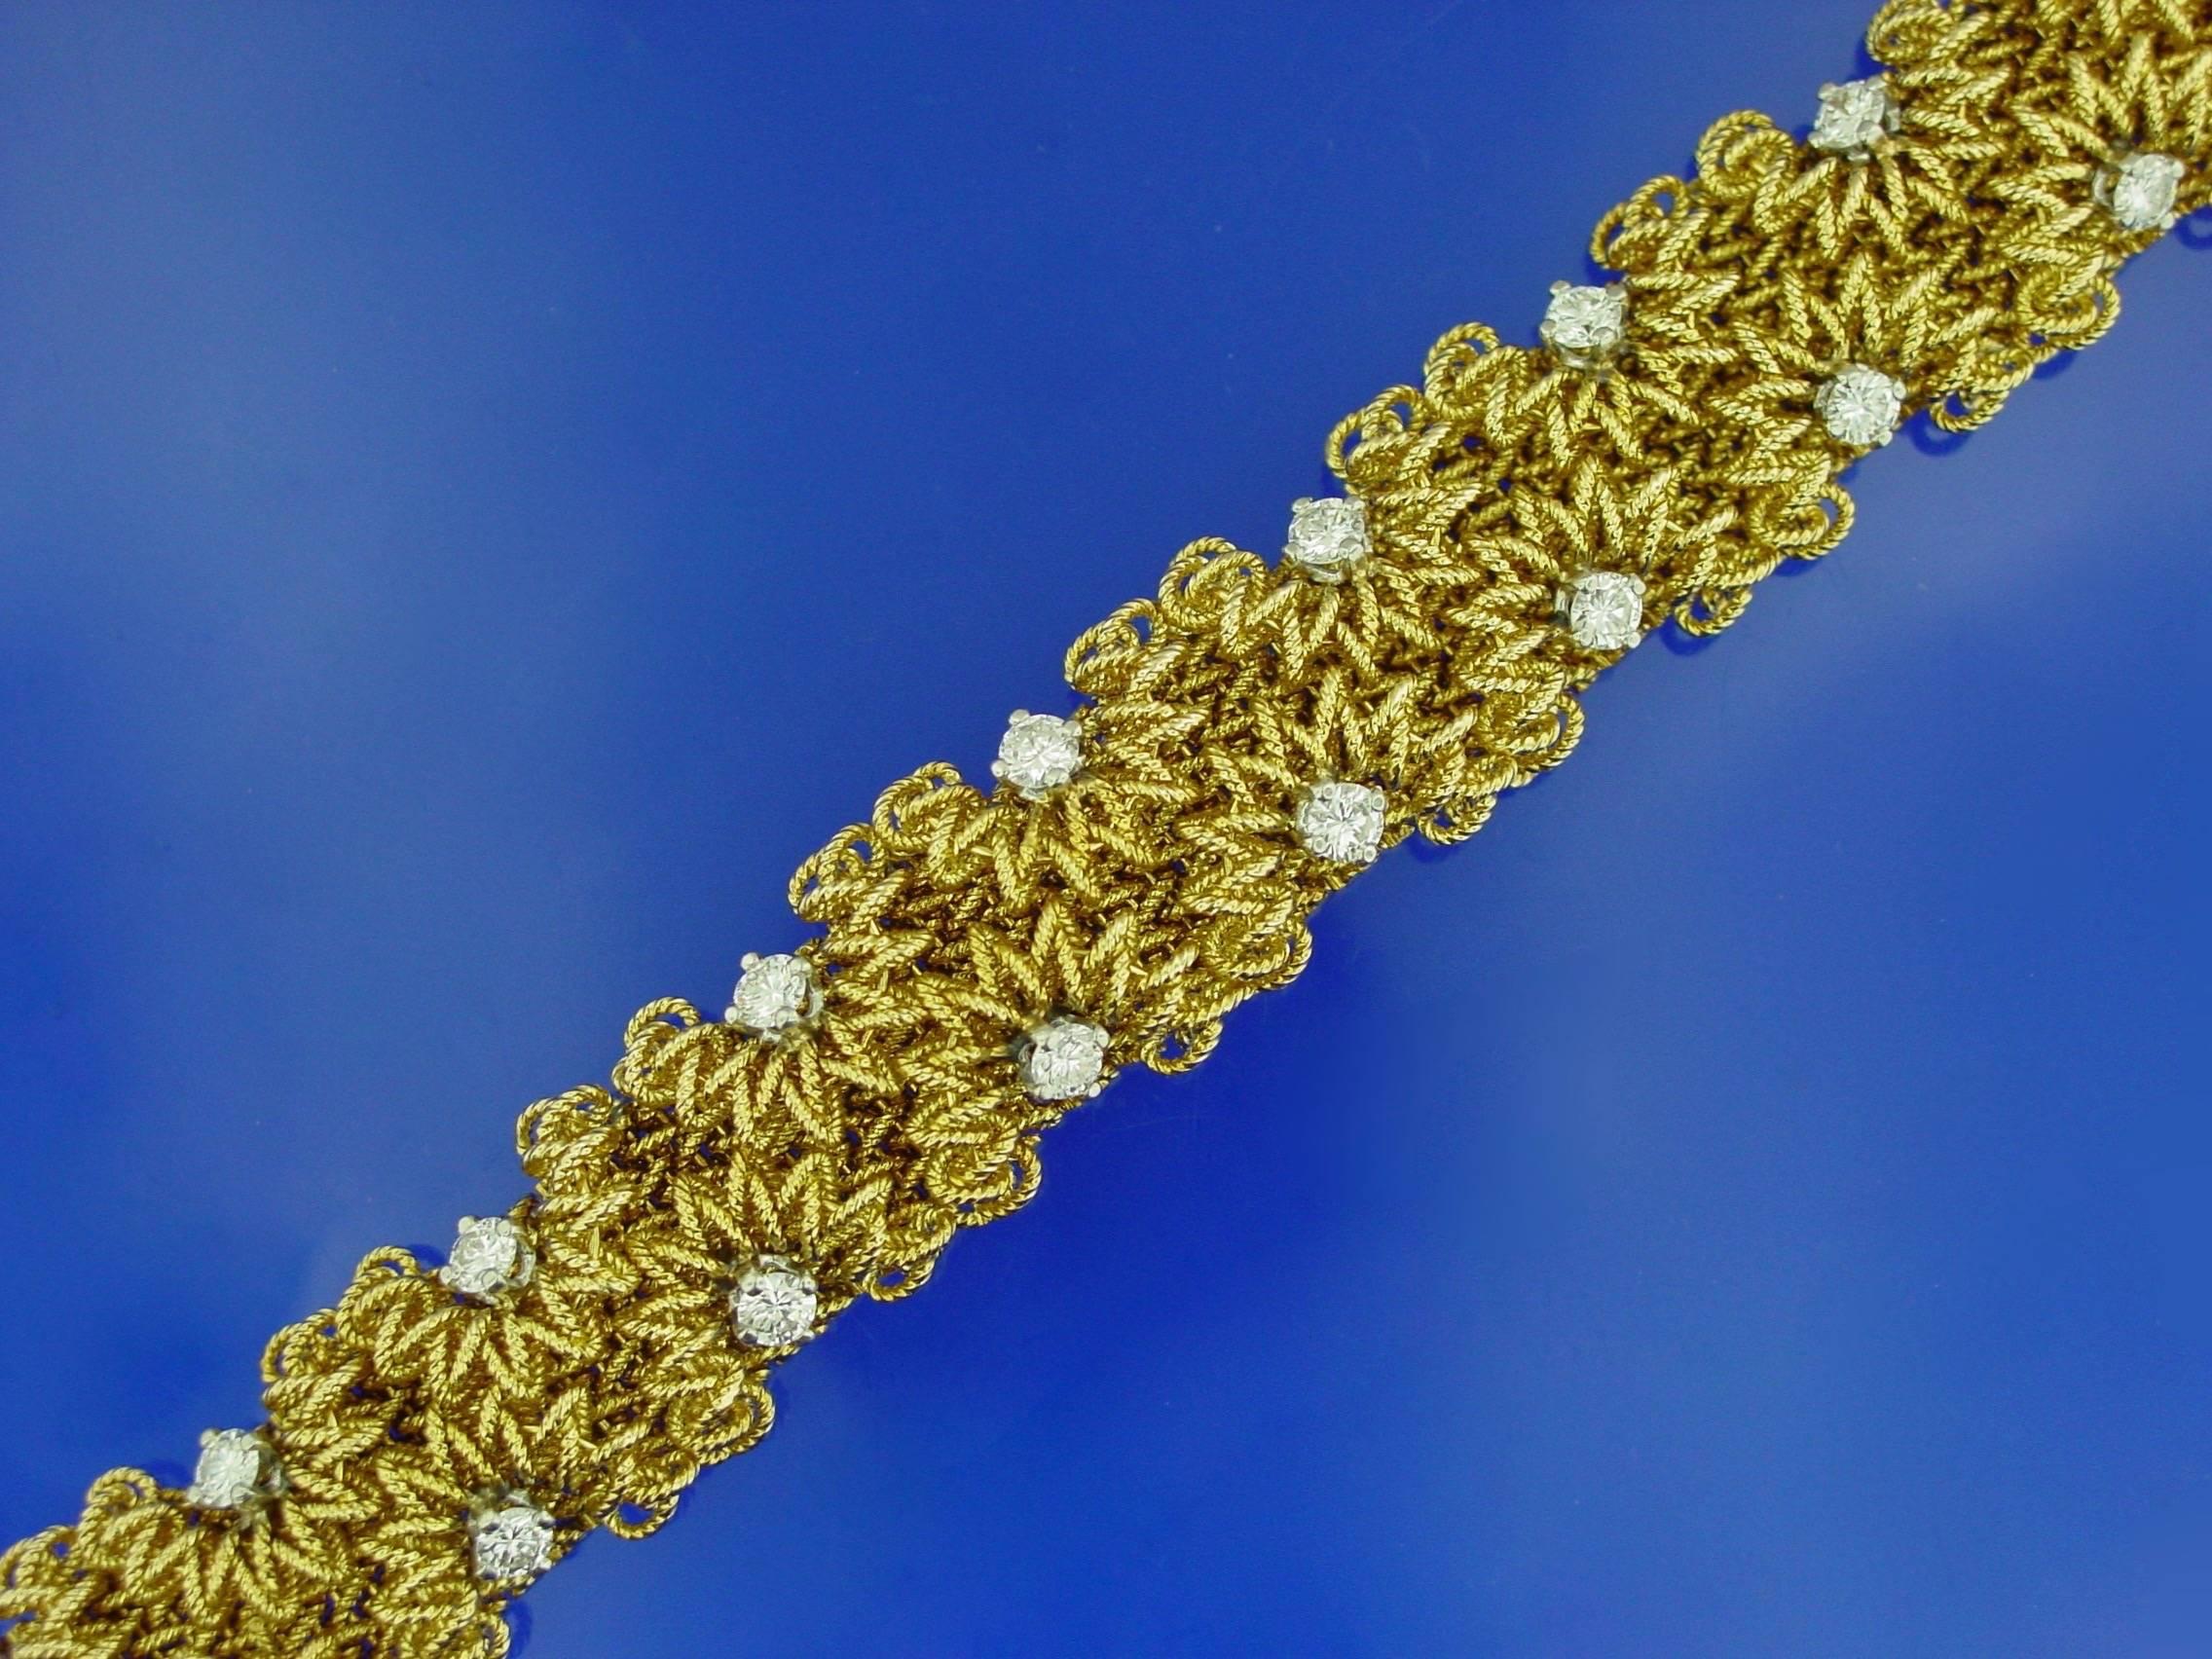 A  superbly crafted French 18 karat yellow gold and diamond bracelet. This very striking bracelet features round brilliant diamonds nestled in a stylized looped wire design. As a testament to the exquisite craftsmanship, this bracelet has no rough